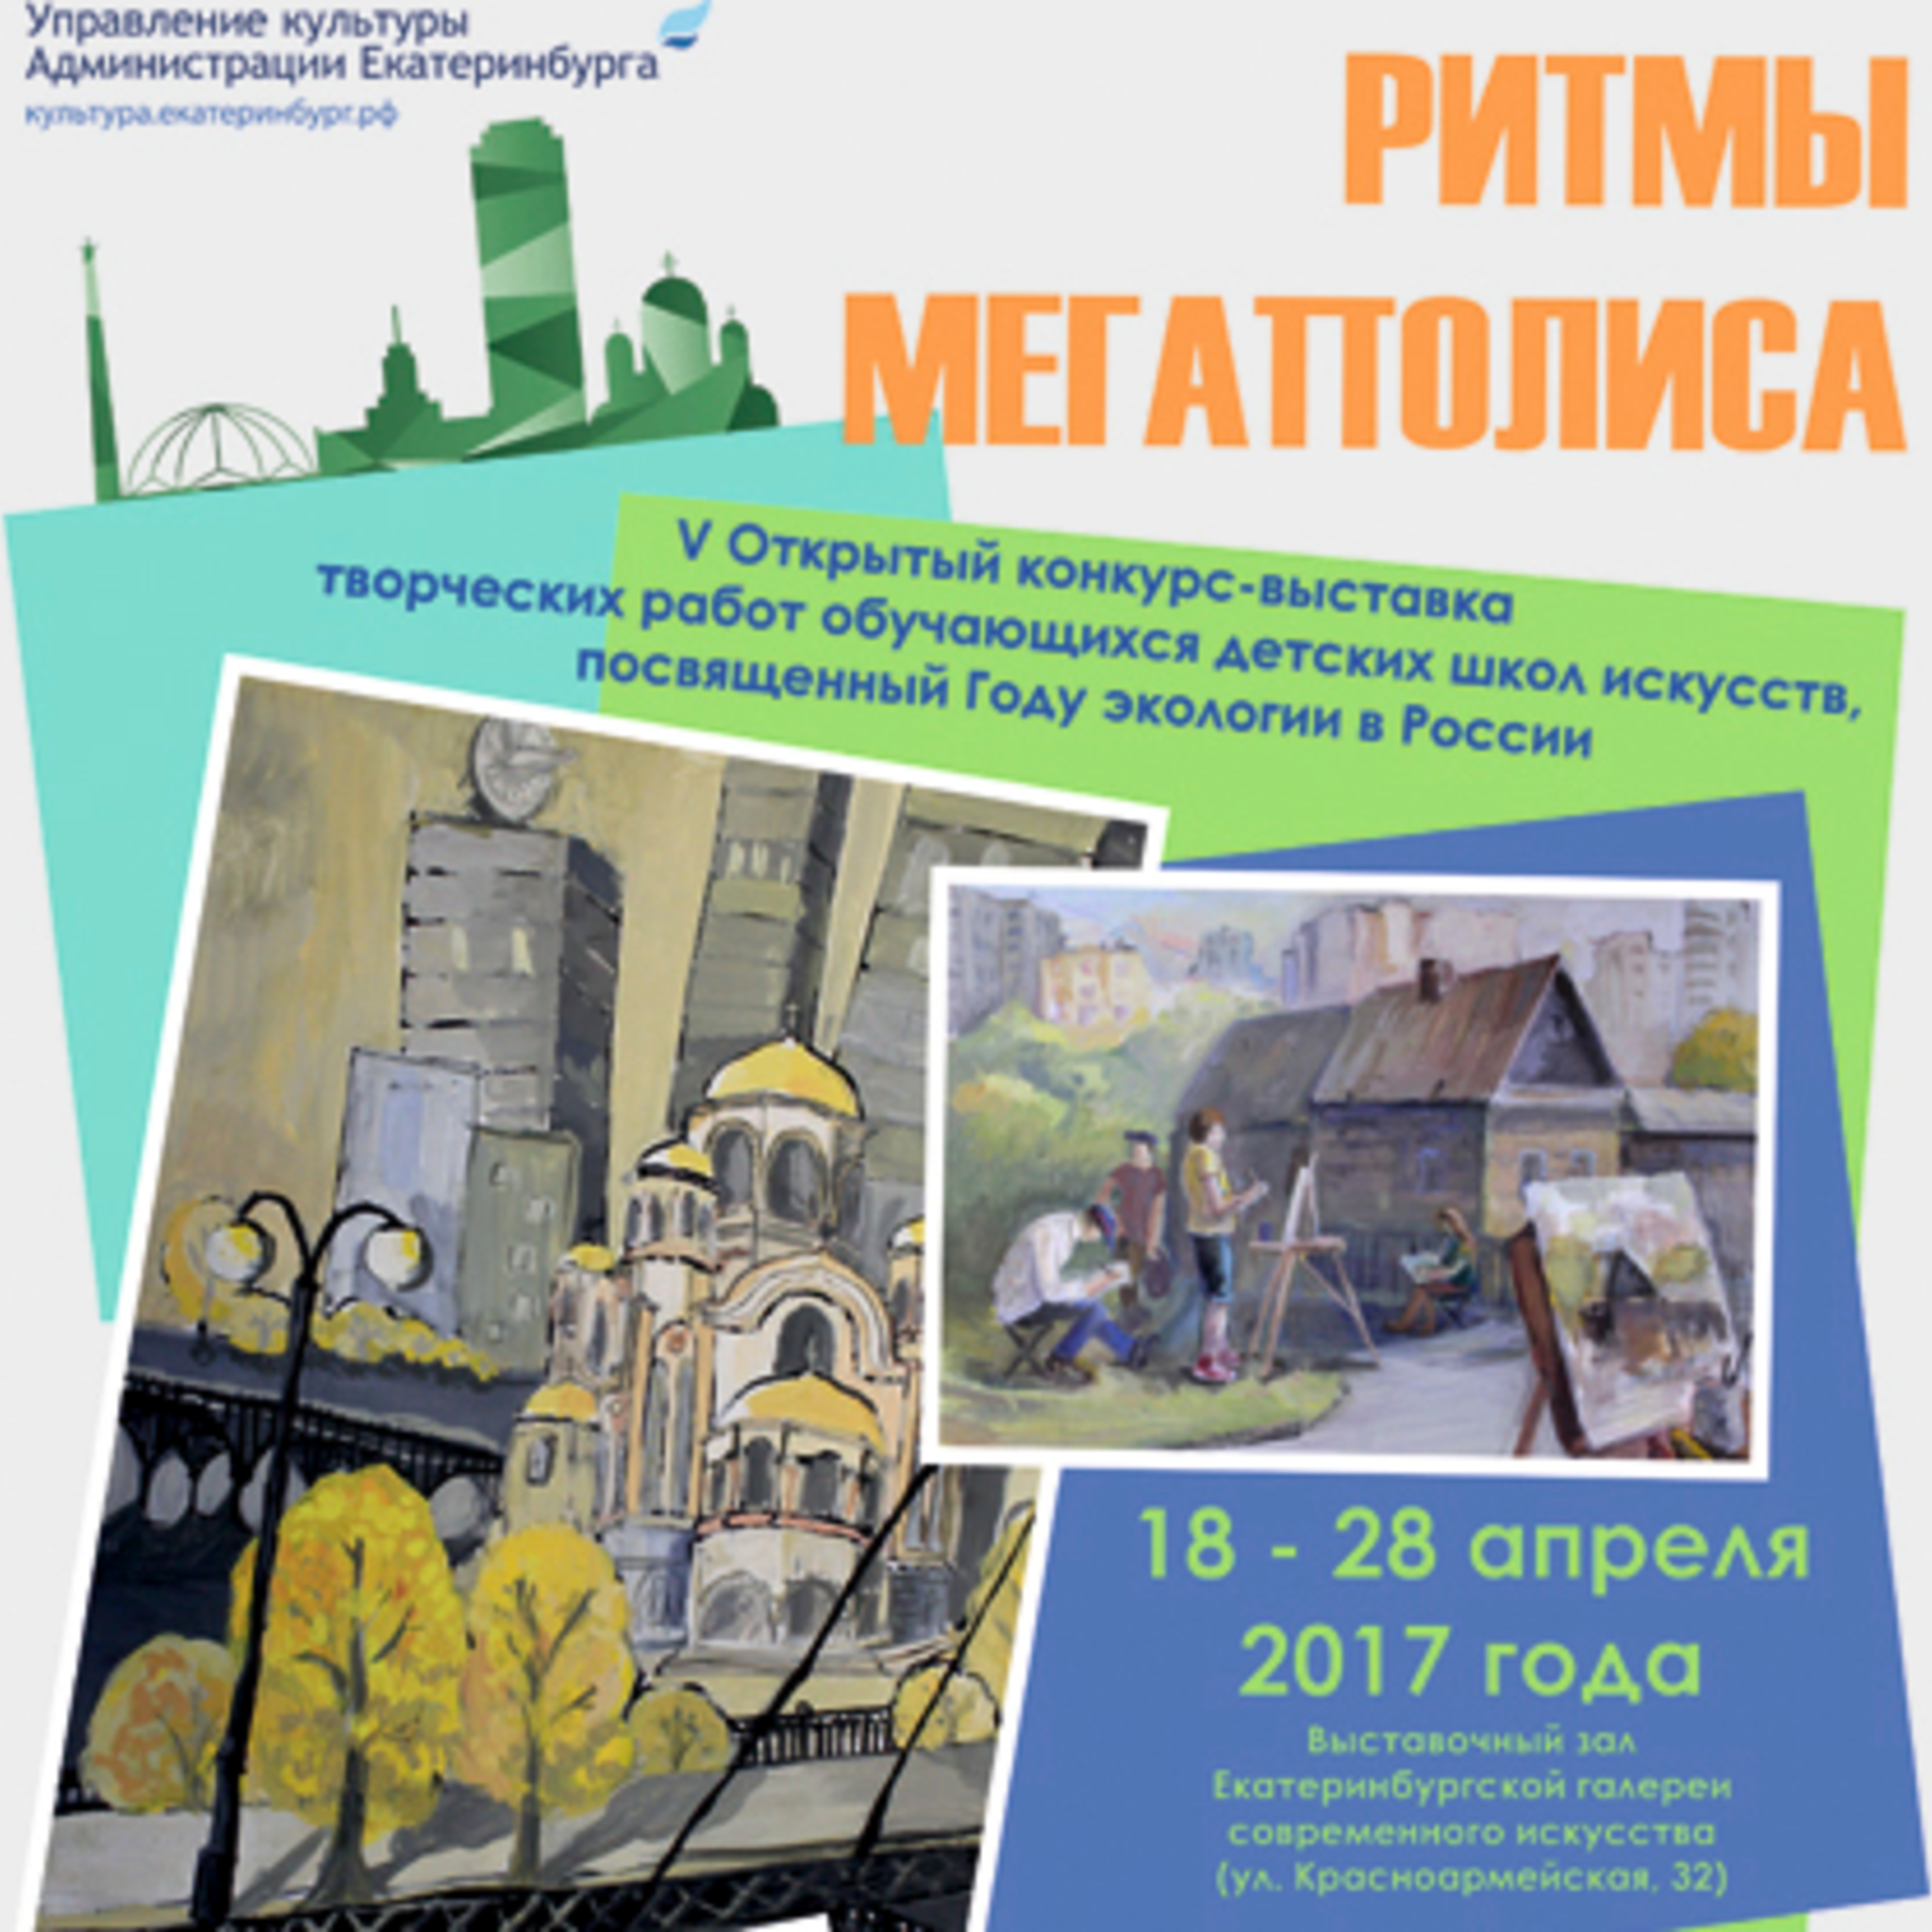 Exhibition of children’s creative works of the competition Rhythms of a megacity